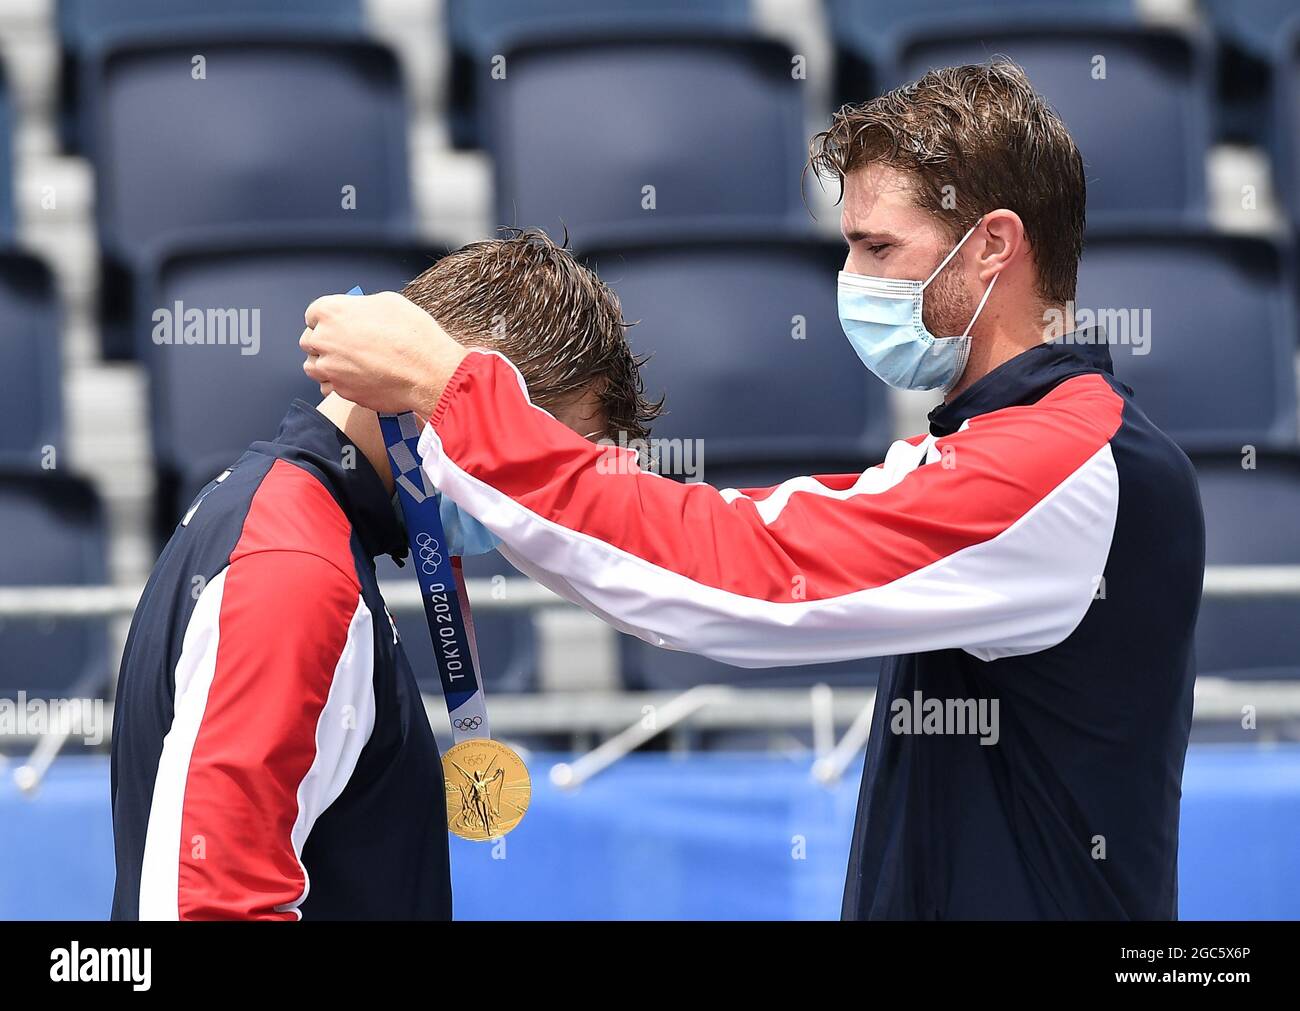 Tokyo, Japan. 7th Aug, 2021. Gold medalists Norway's Anders Berntsen Mol (R)/Christian Sandlie Sorum put on the medals during the awarding ceremony for the men's beach volleyball event at the Tokyo 2020 Olympic Games in Tokyo, Japan, Aug. 7, 2021. Credit: Li He/Xinhua/Alamy Live News Stock Photo